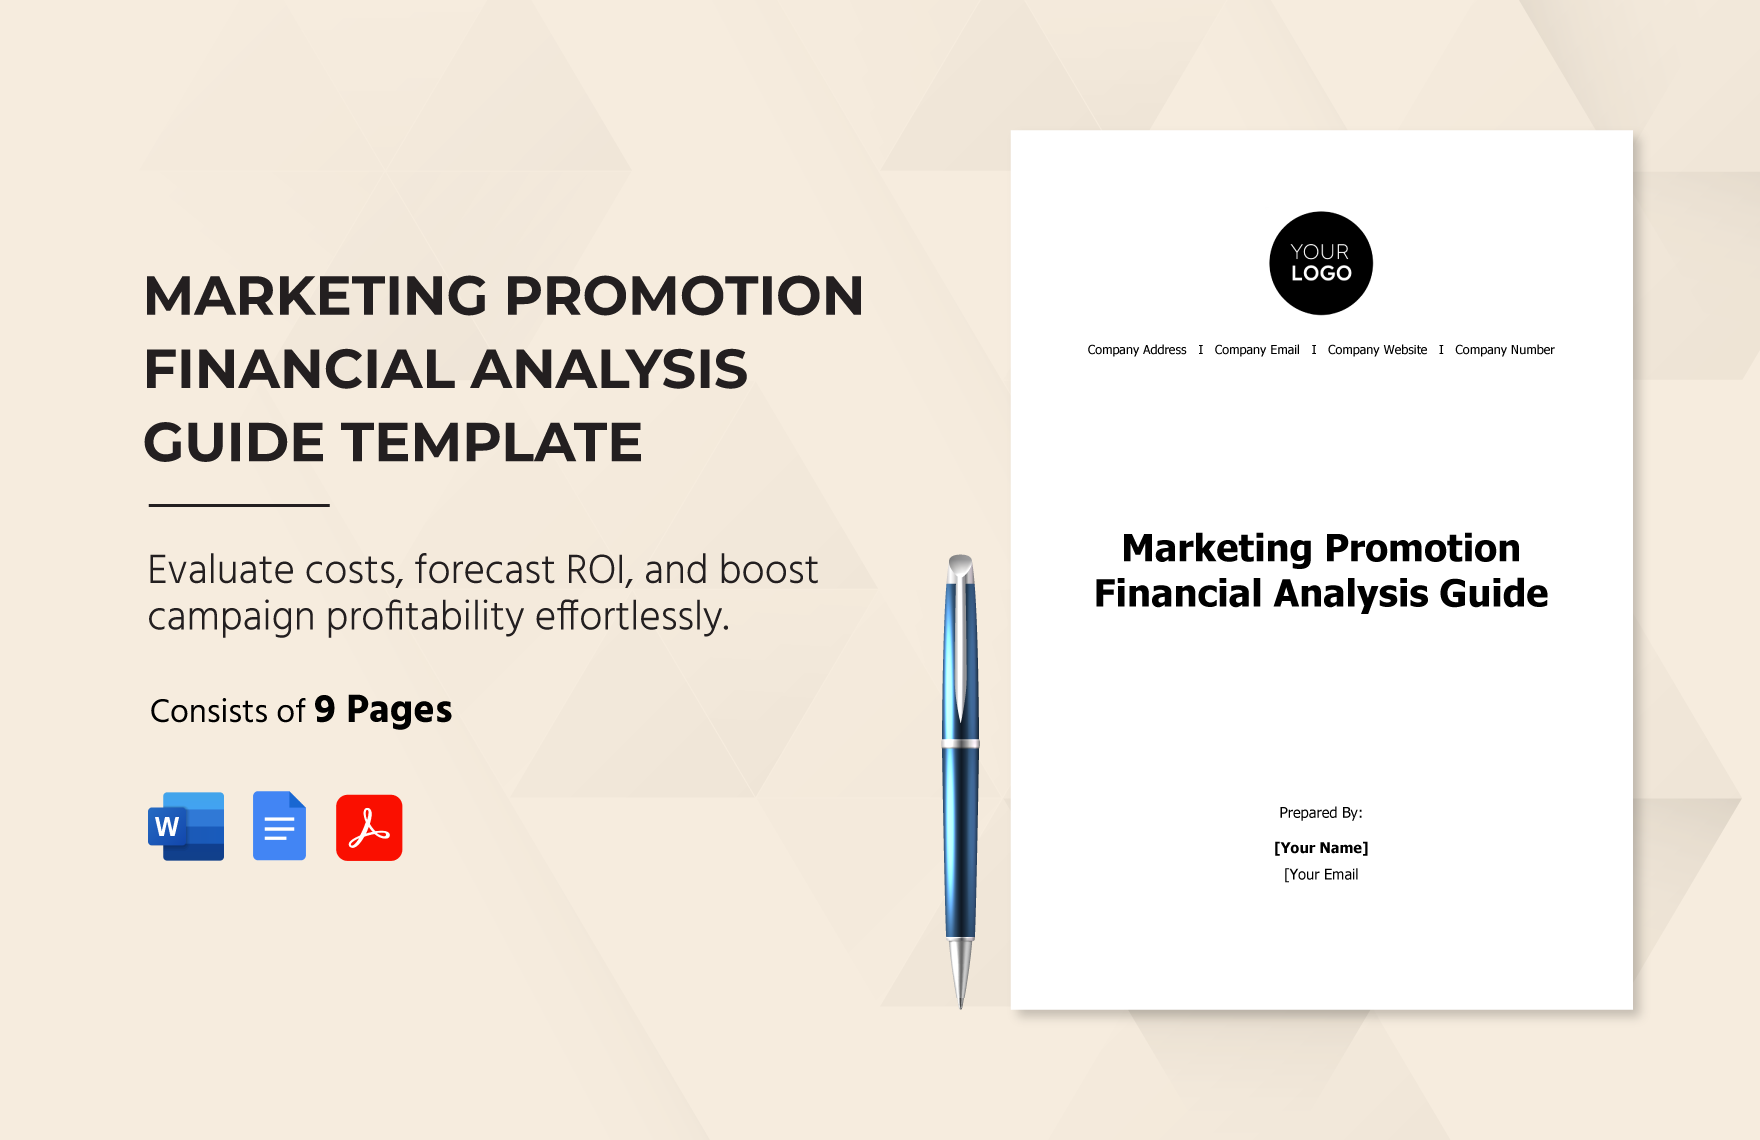 Marketing Promotion Financial Analysis Guide Template